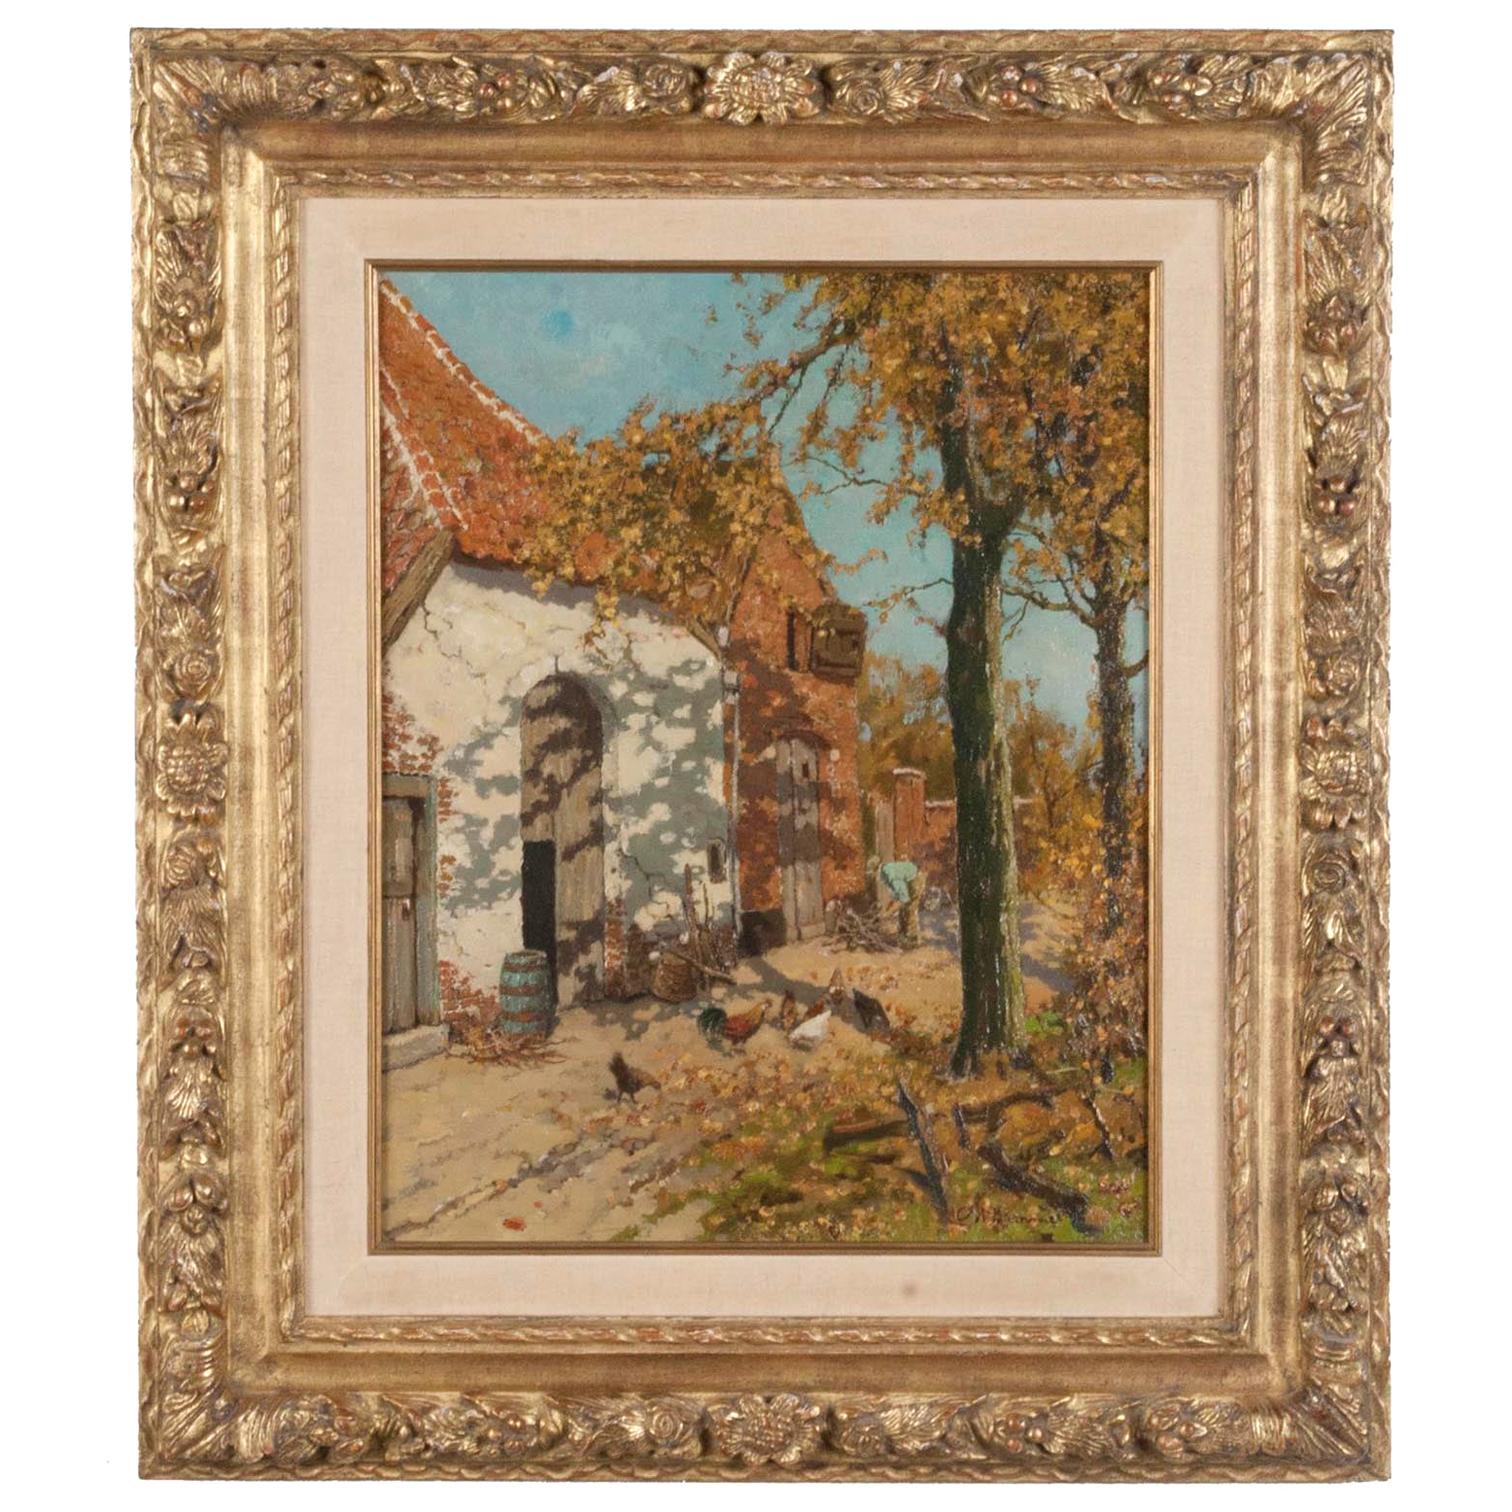 Early 20th Century Oil Painting of a Farm with Chickens in The Yard